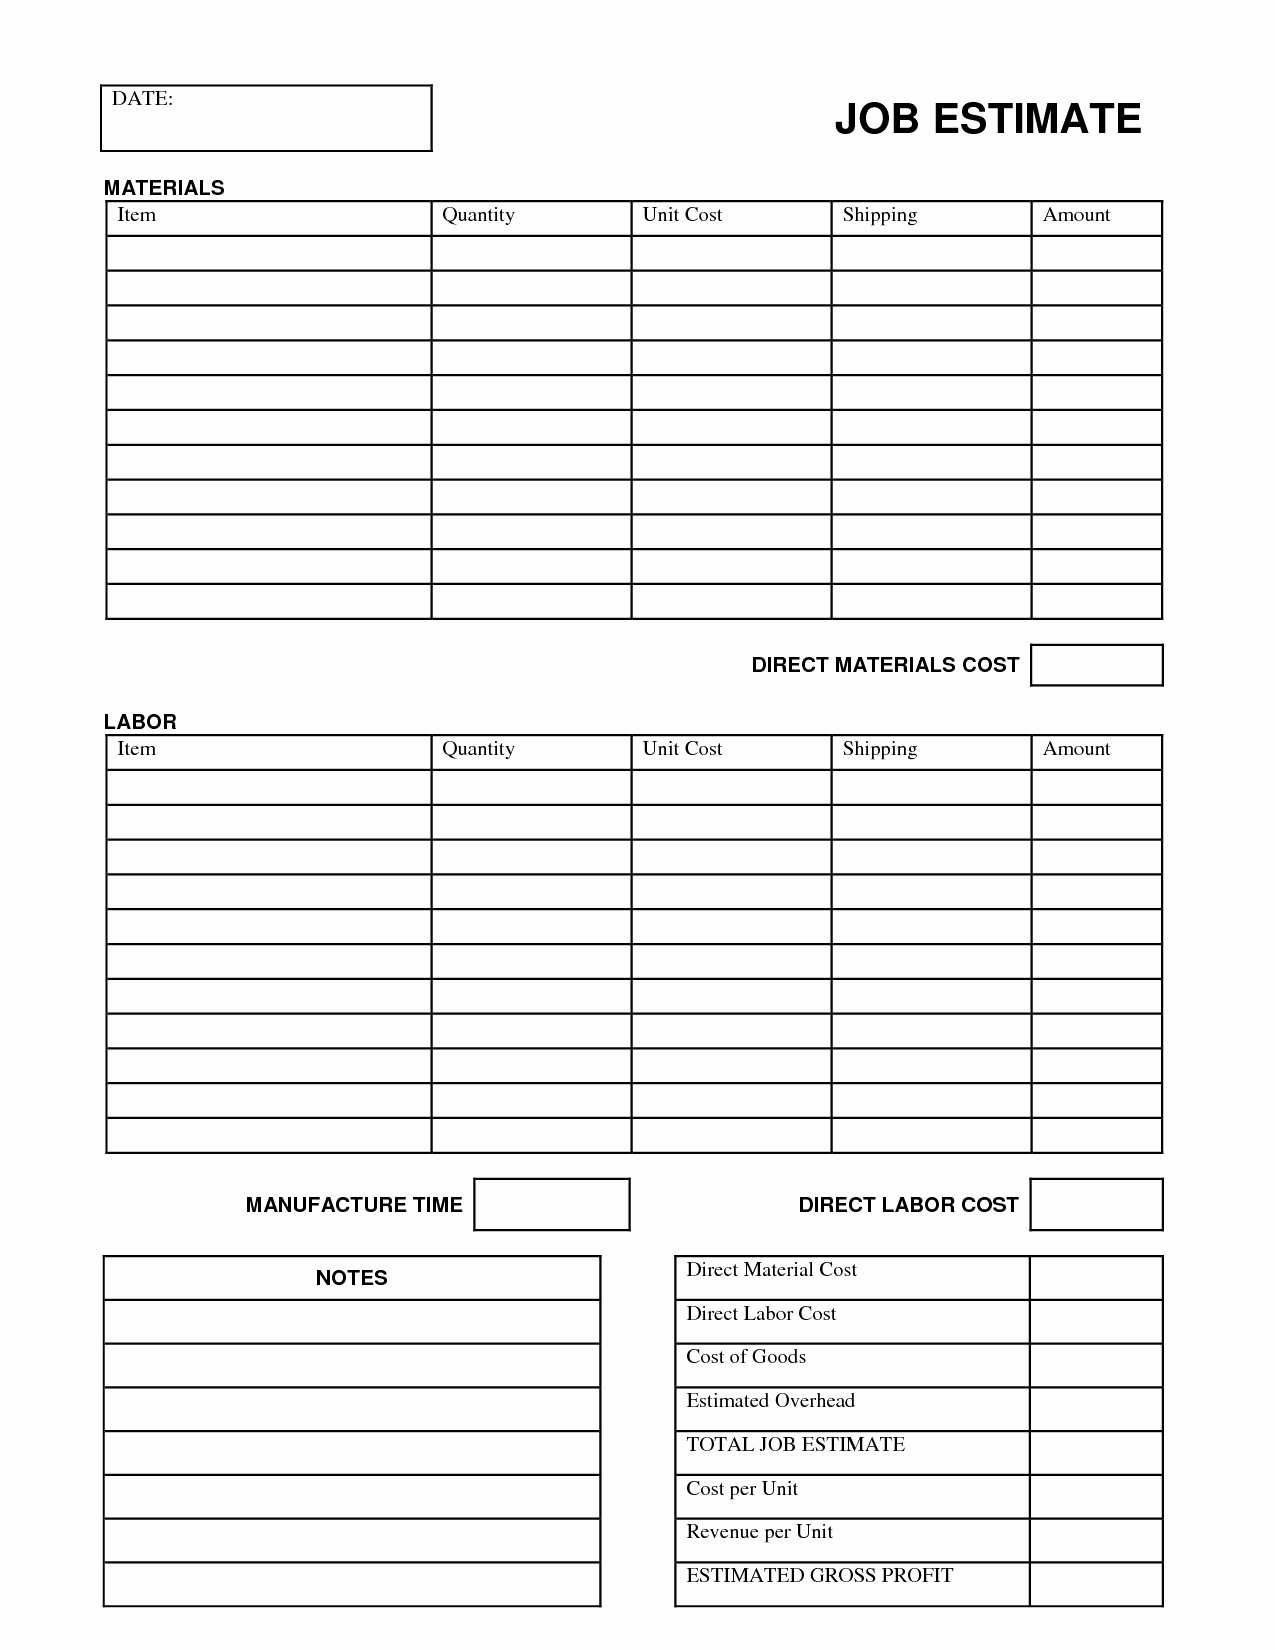 Irs Itemized Deductions Worksheet together with Nice Tax Home Fice Deduction Inspiration Home Decorating